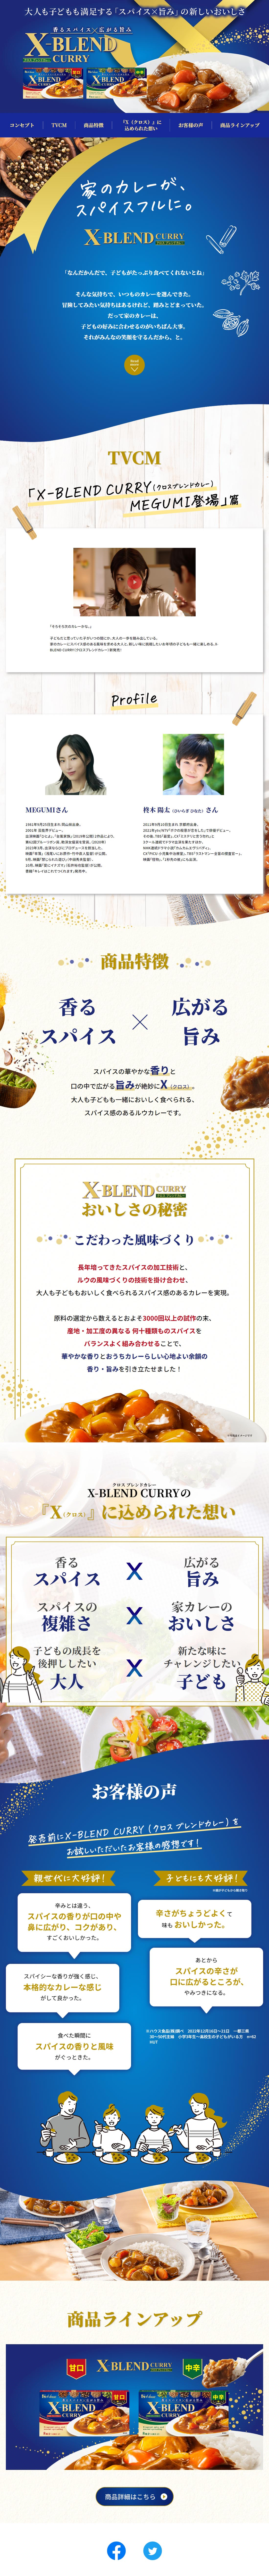 X-BLEND CURRY_pc_1